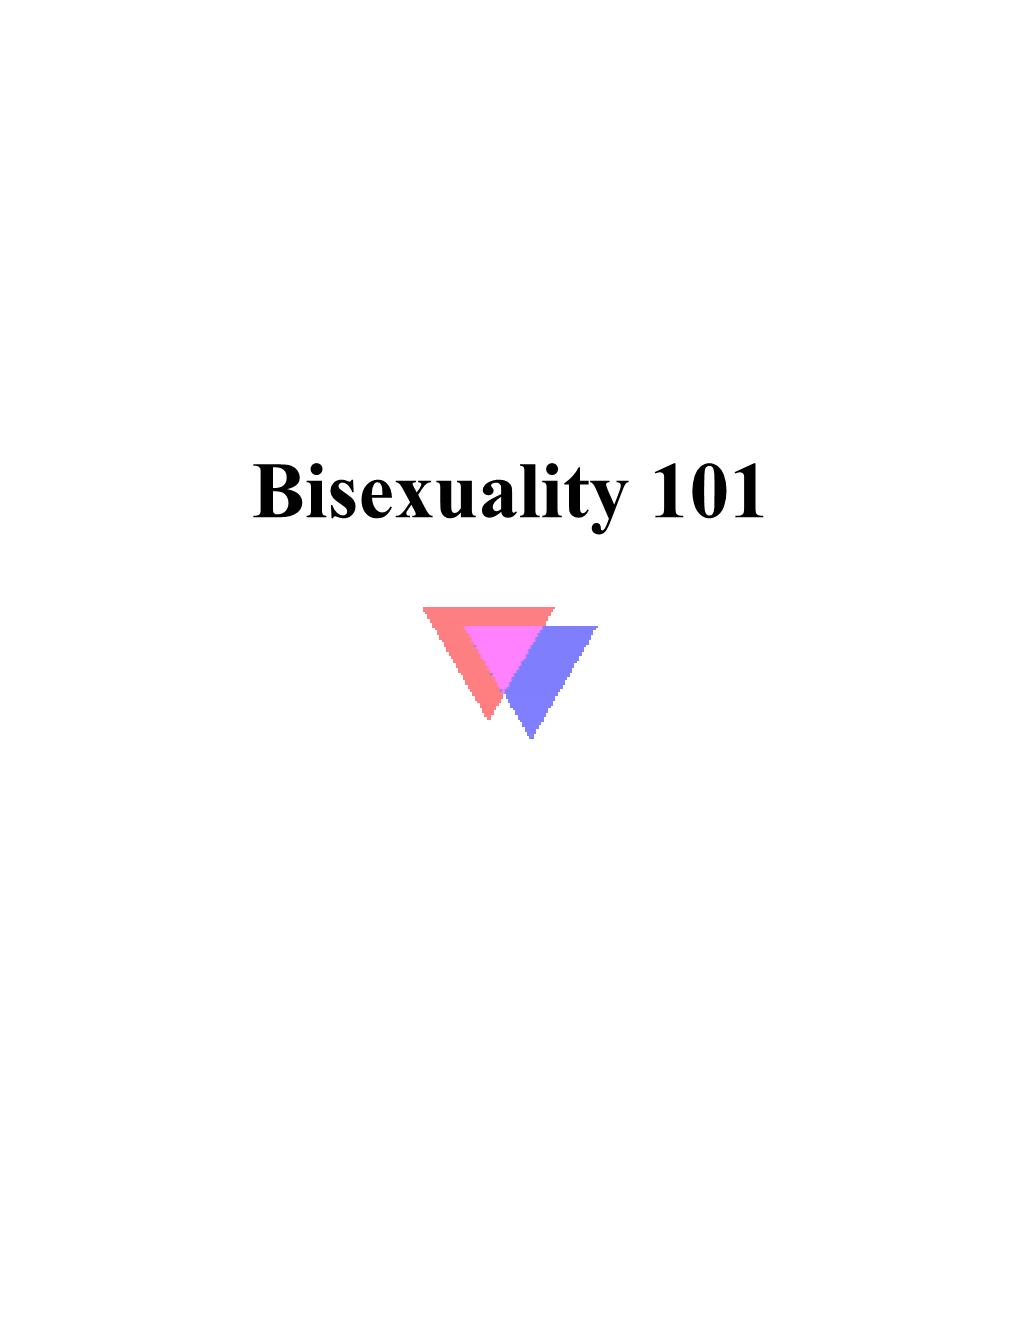 Bisexuality 101